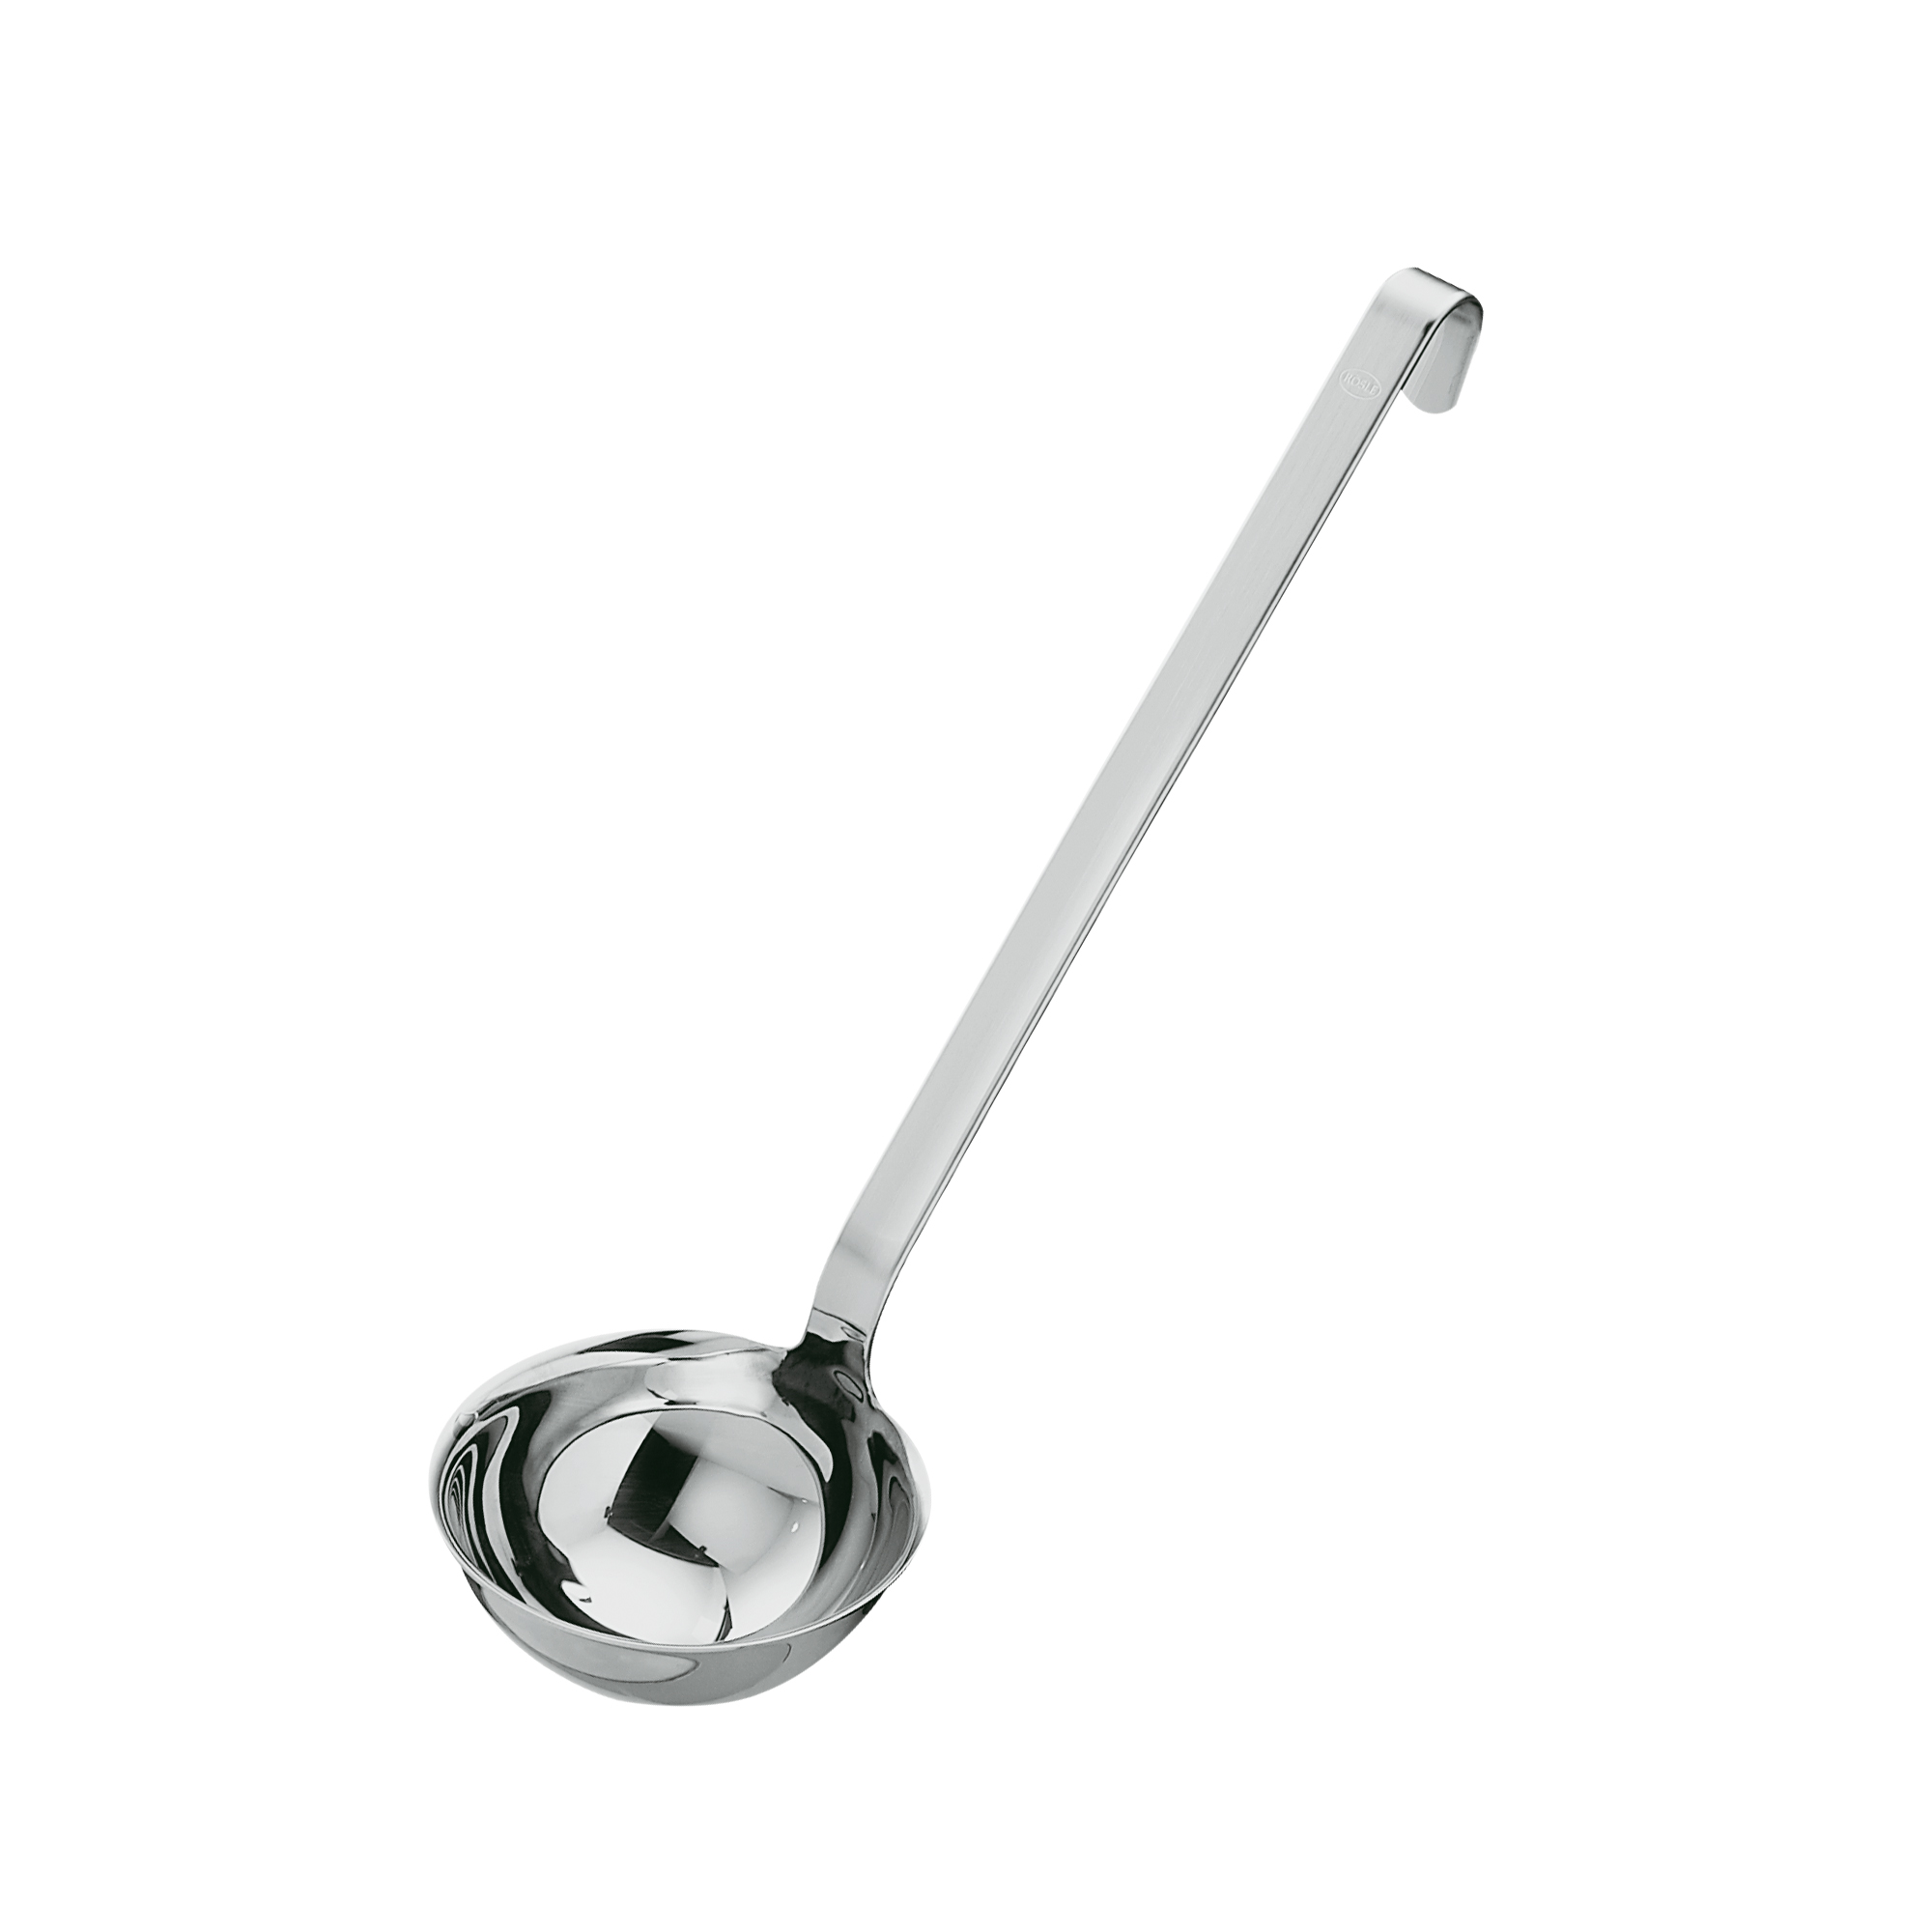 Hook Ladle with pouring rim Ø 7 cm|2.8 in.